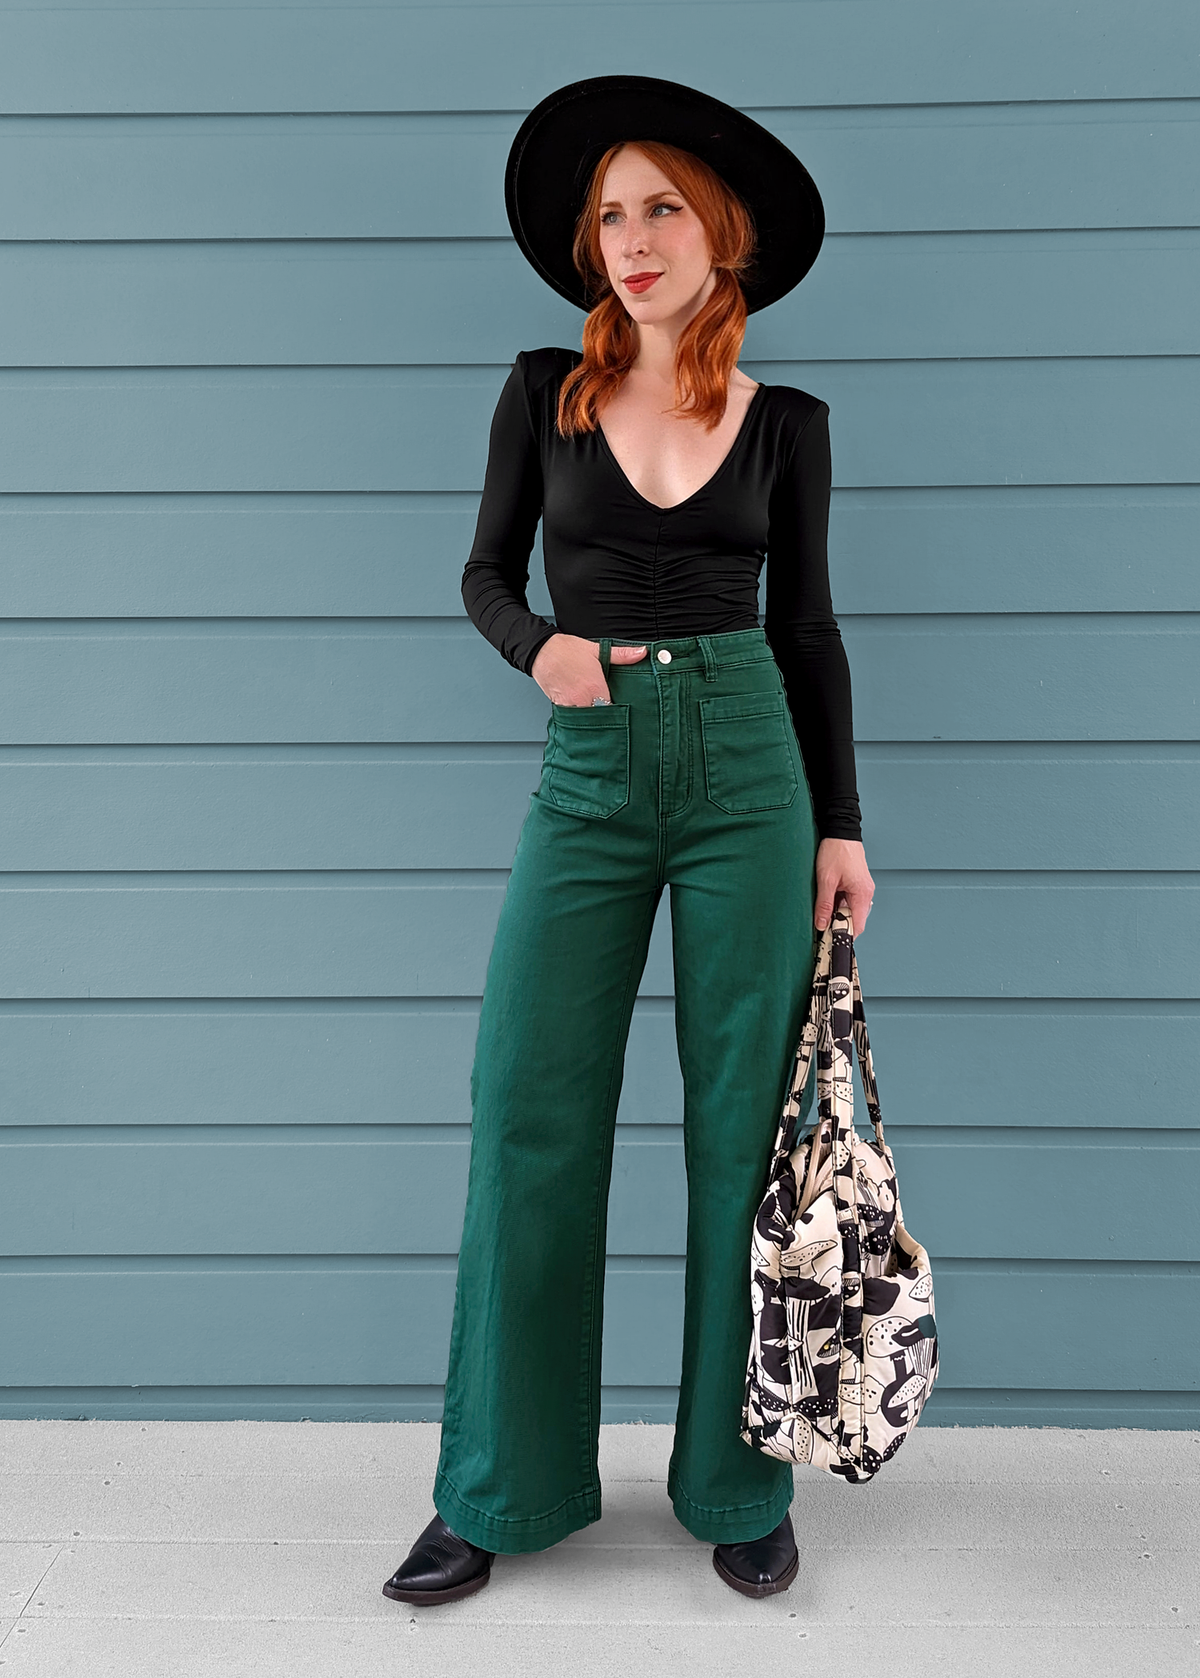 70s inspired high rise waist stretch cotton basil green sailor wide leg crop pant jean by Rolla's Jeans